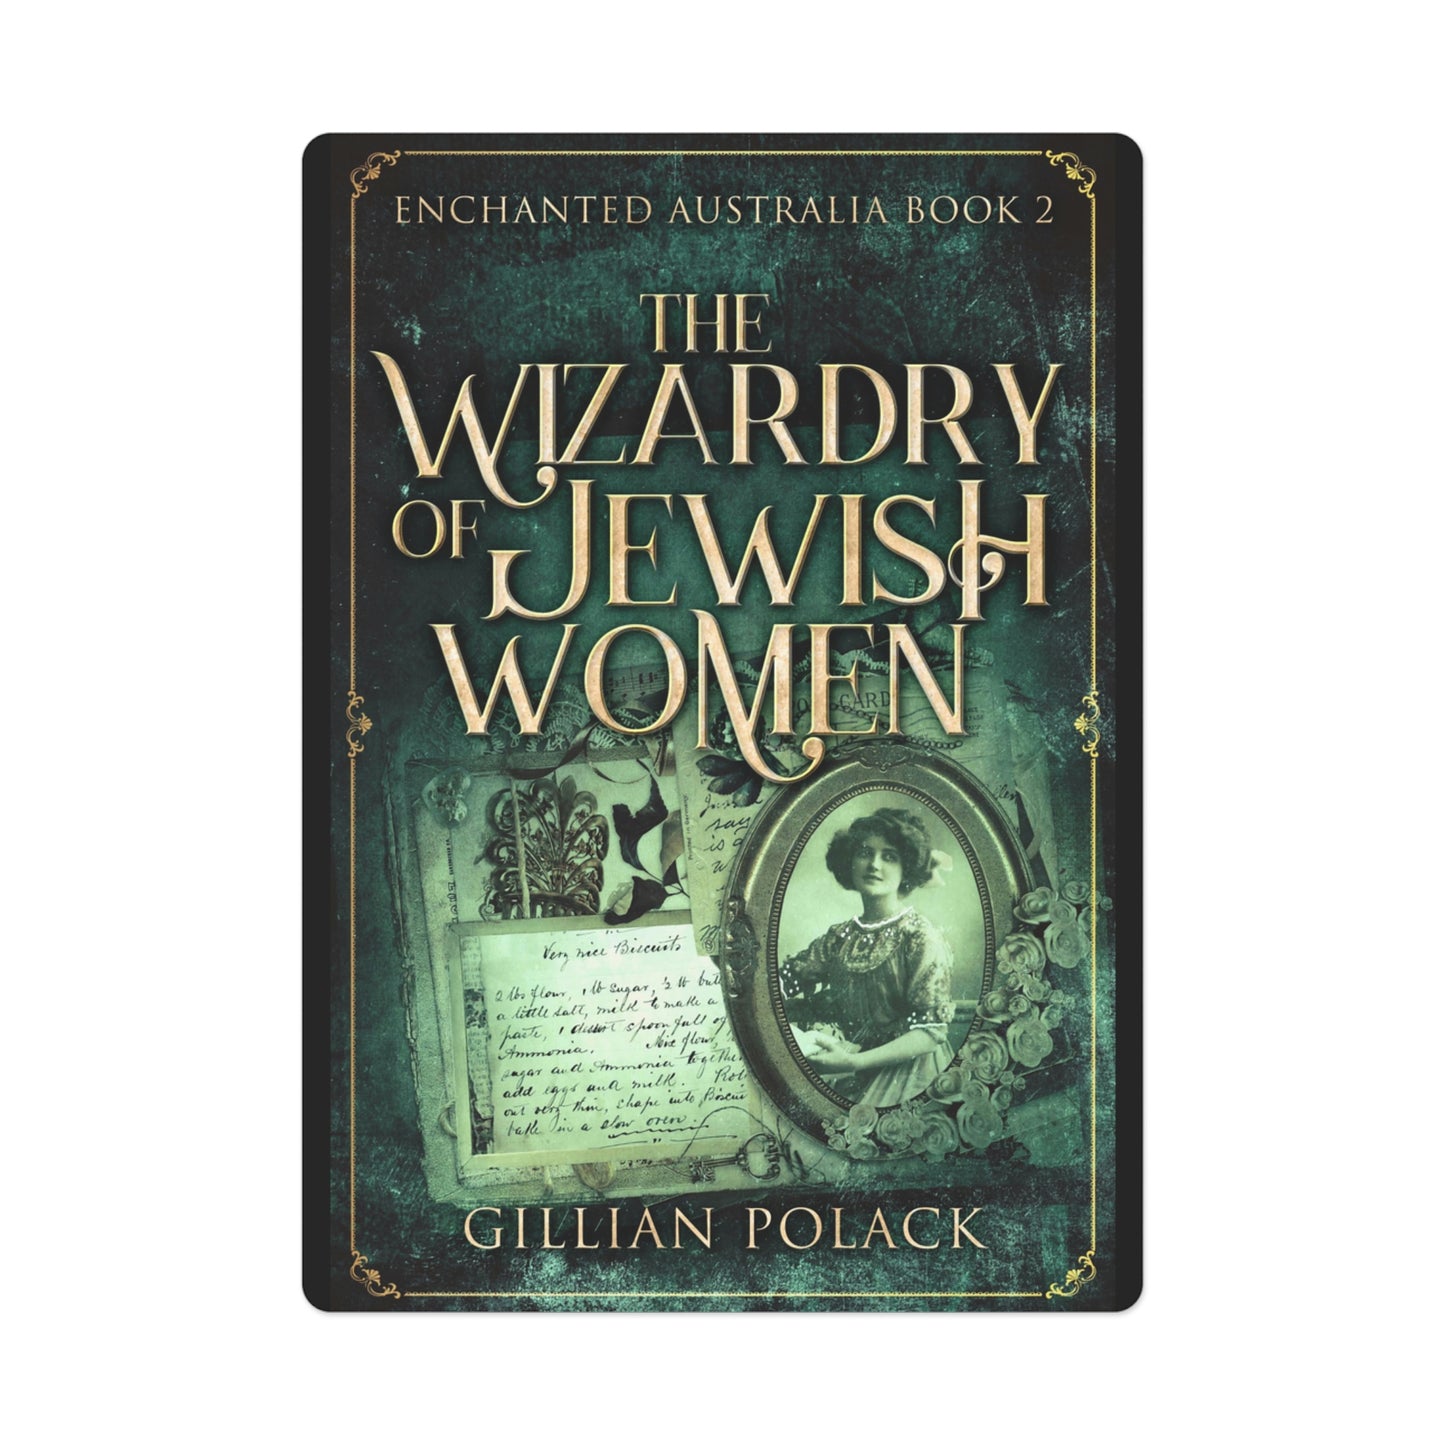 The Wizardry of Jewish Women - Playing Cards